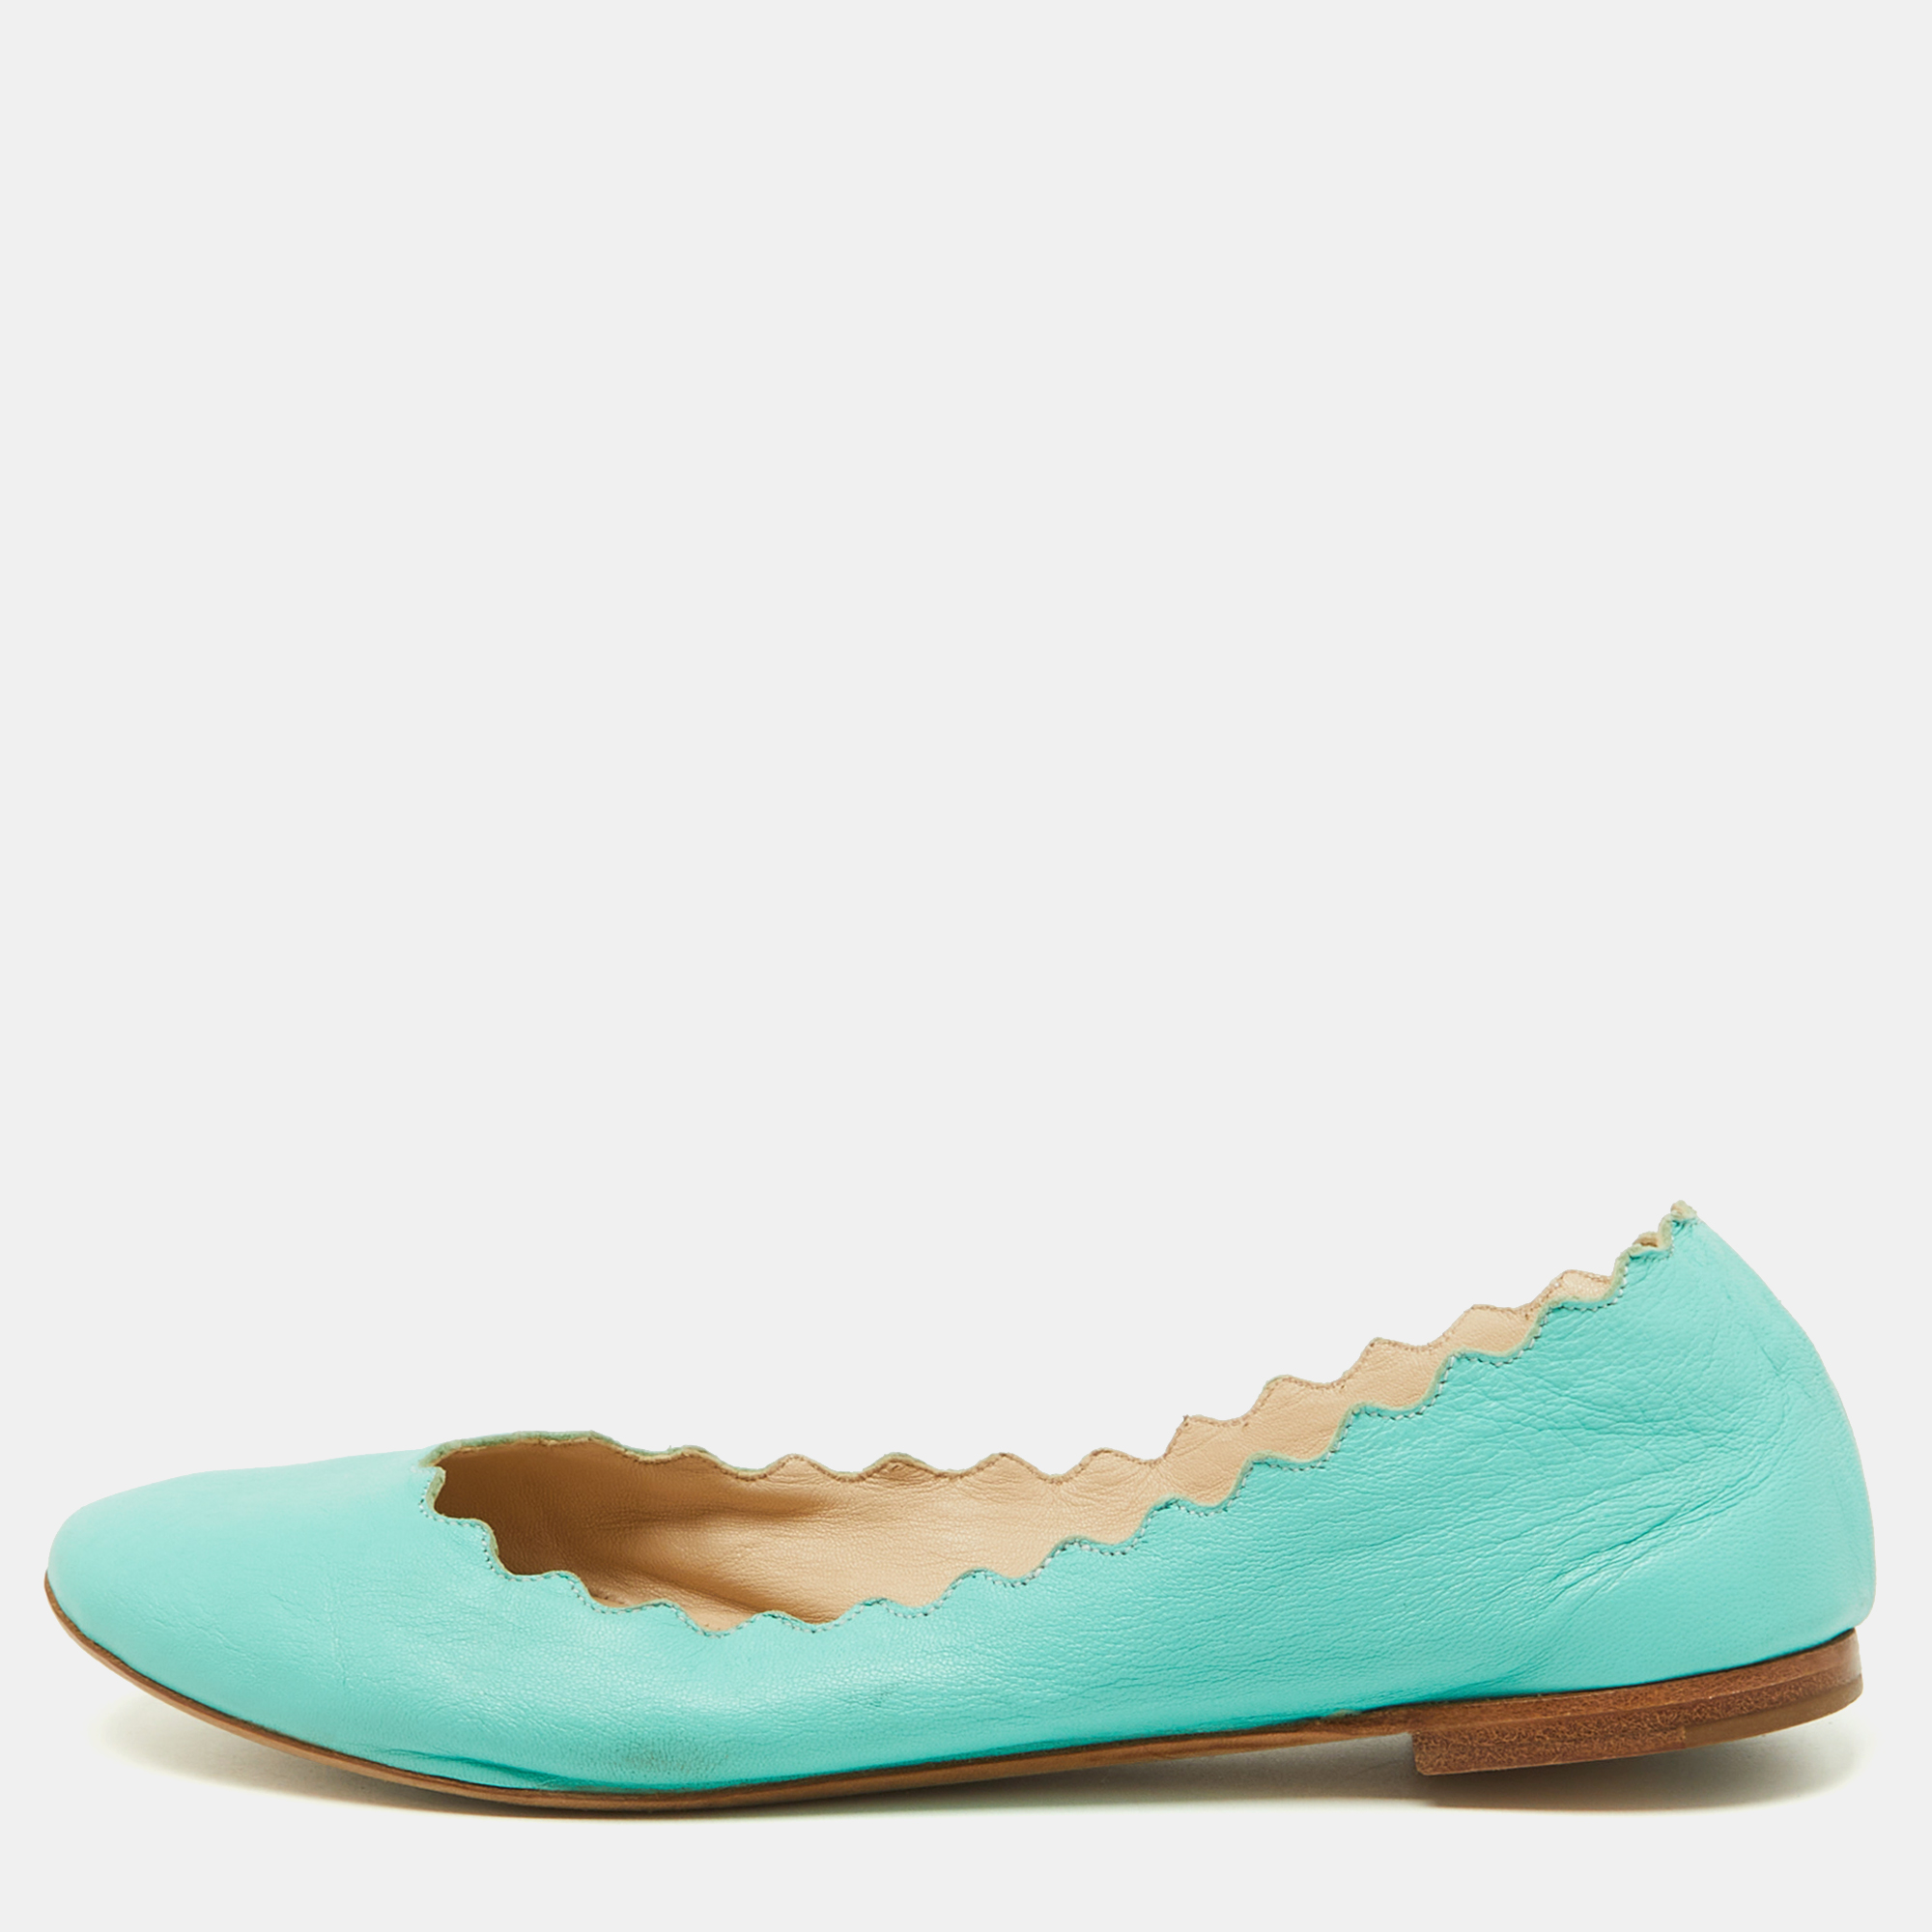 Pre-owned Chloé Green Scalloped Leather Lauren Ballet Flats Size 37